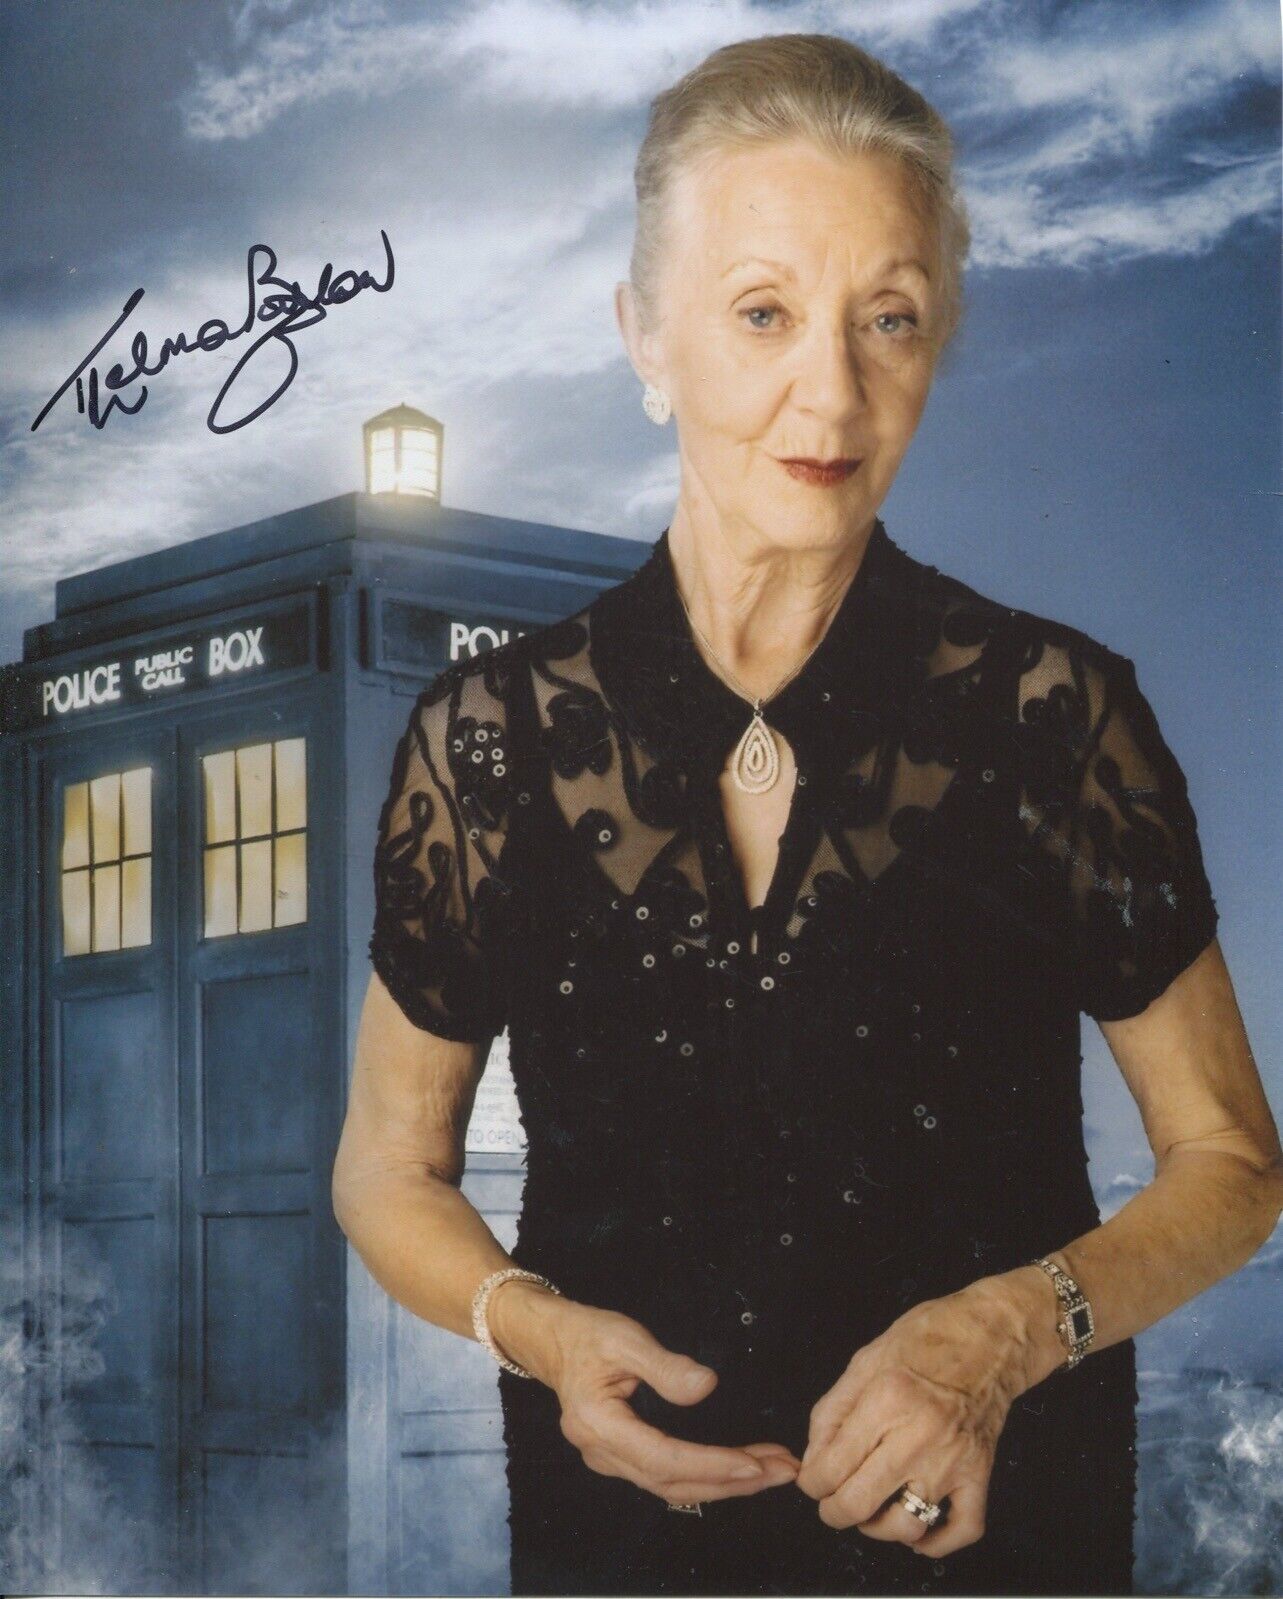 Doctor Who The Lazarus Experiment Photo Poster painting signed by Thelma Barlow - UACC DEALER